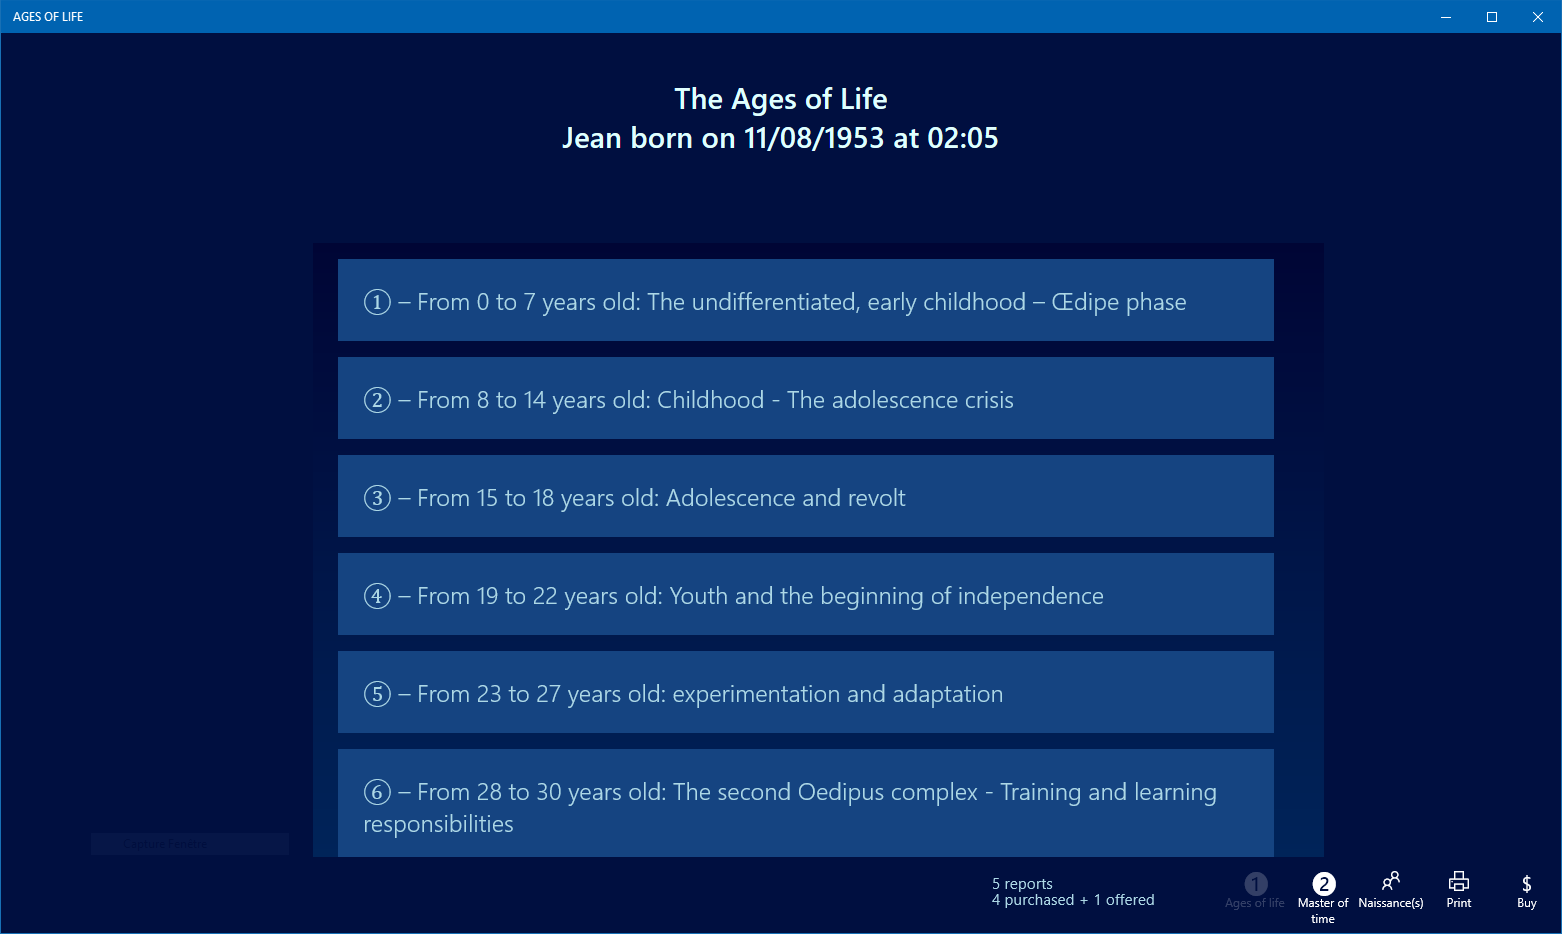 THE AGES OF LIFE